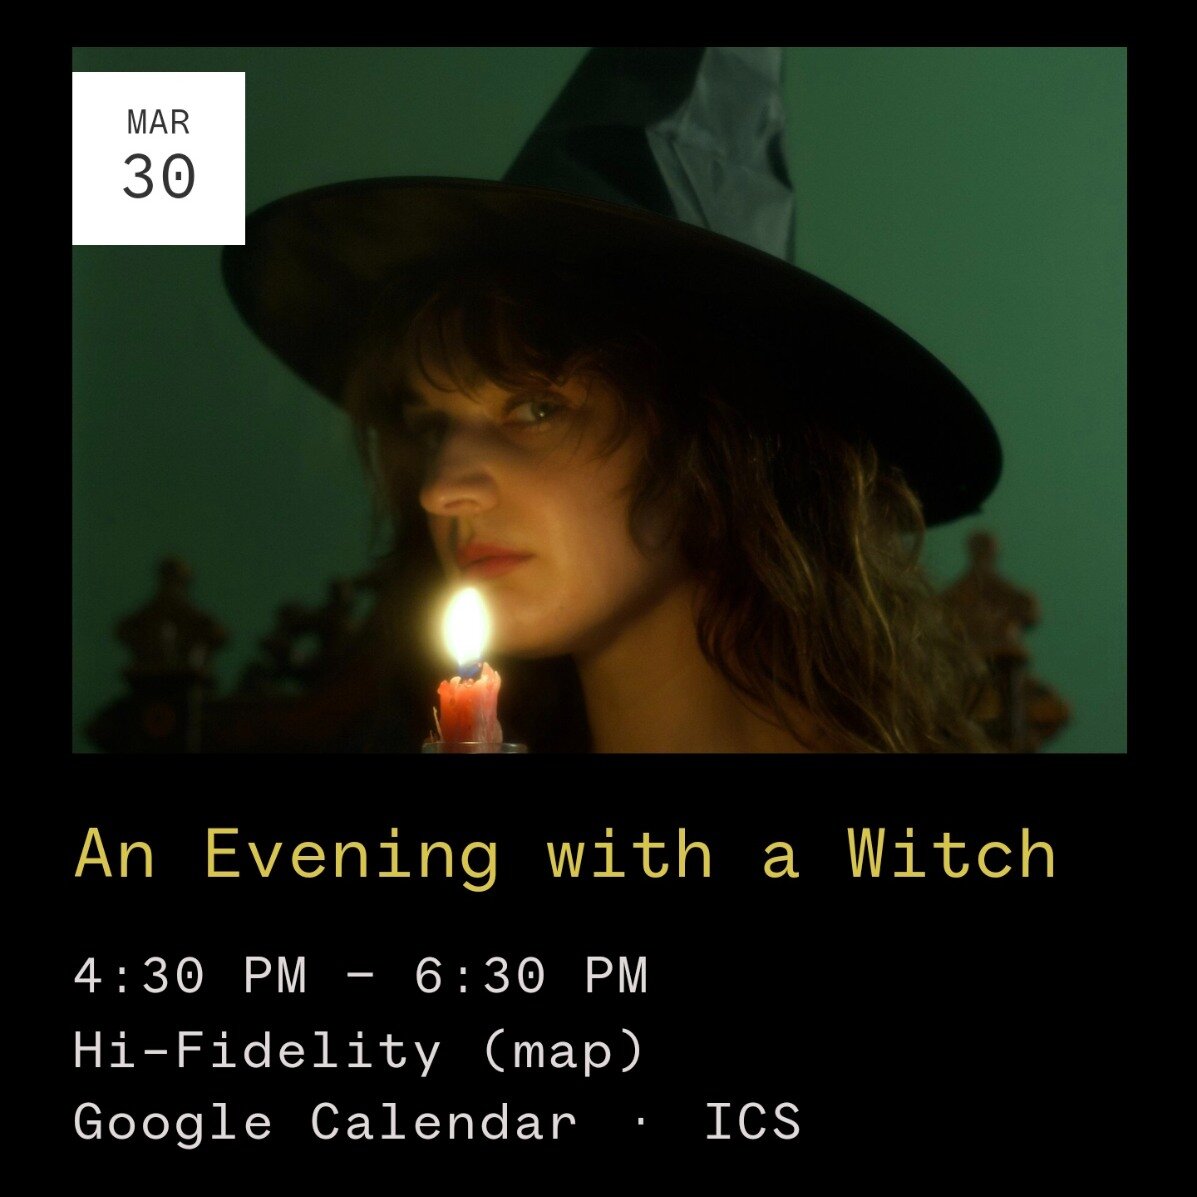 🔮✨ **MAGIC &amp; MANIFESTATION EVENT! SATURDAY 3/30, 4:30-6:30pm** ✨🔮

Join us for an enchanting session with @west_end_witch where you can explore magic, manifestation, and metaphysics! 🌙✨

Bring your burning questions, tarot decks, and intention